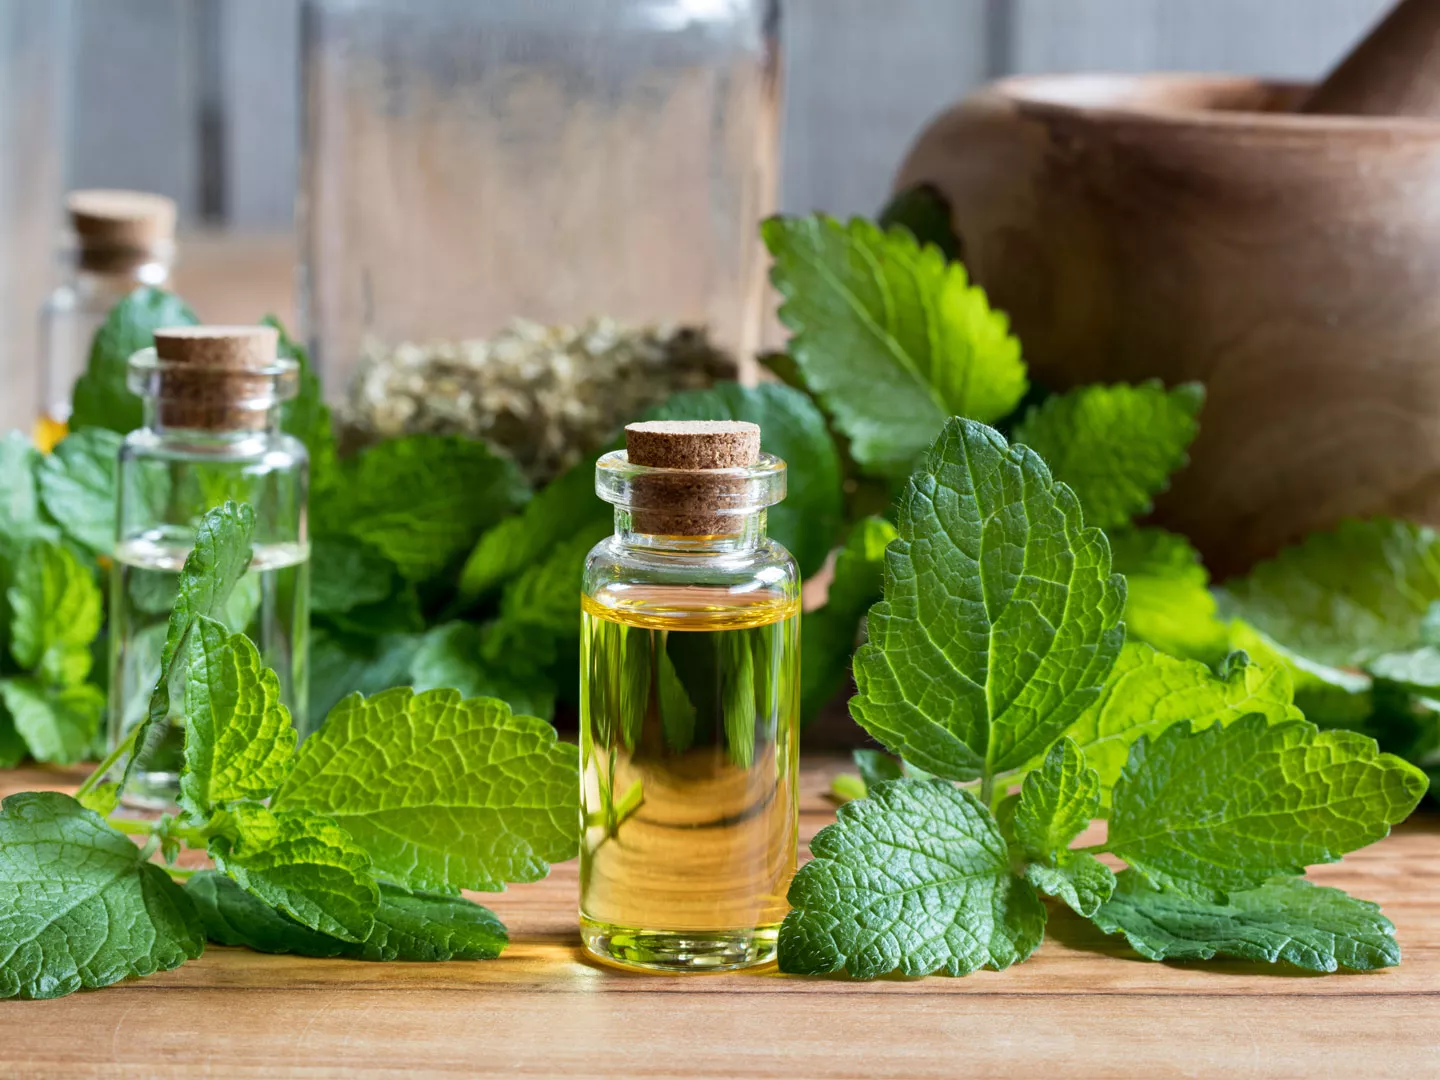 Why does Lemon Balm Work Well with Valerian?